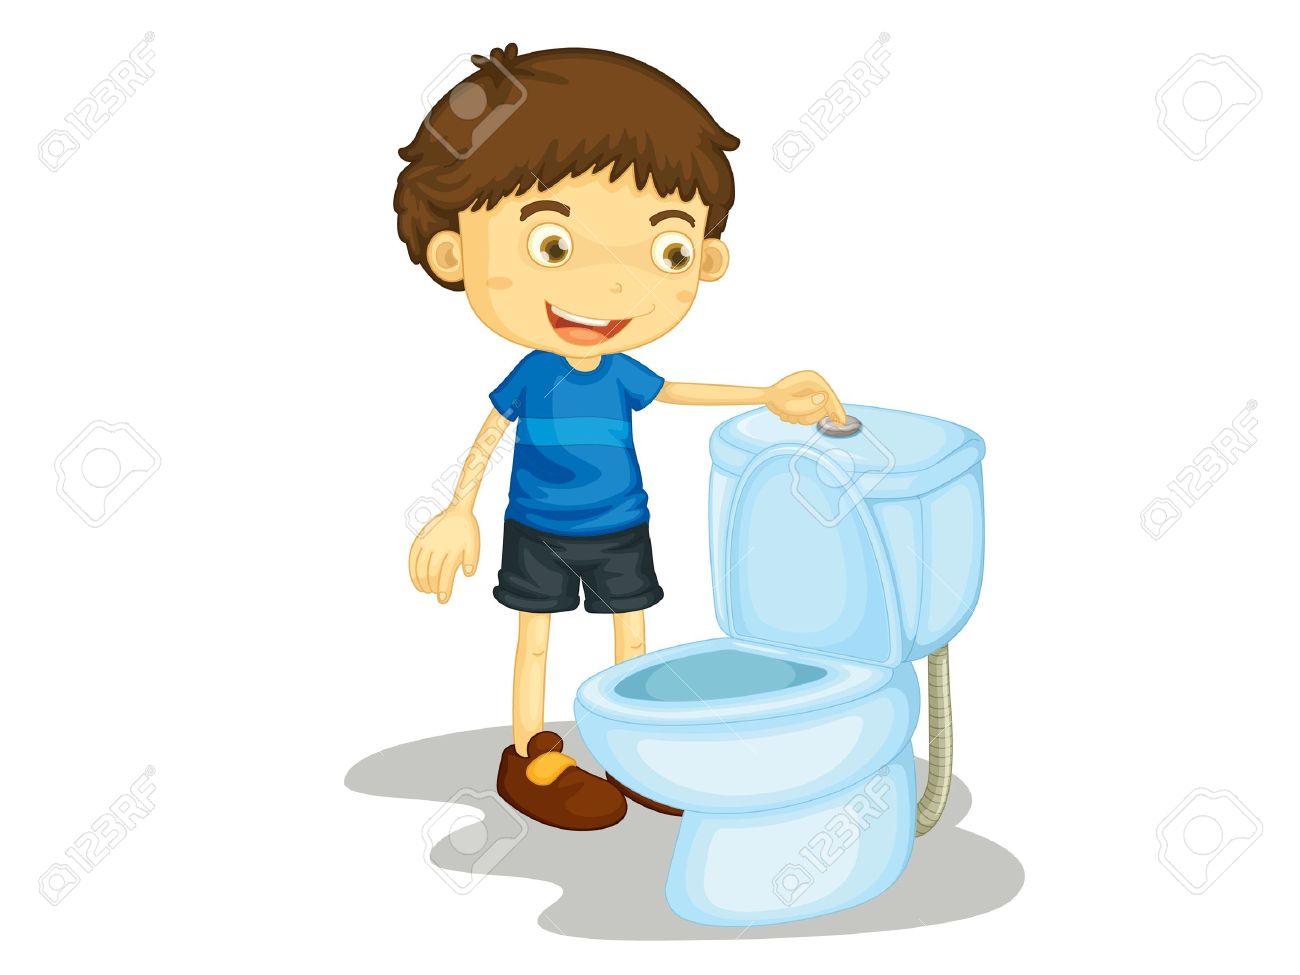 toilet cleaning clipart - photo #42